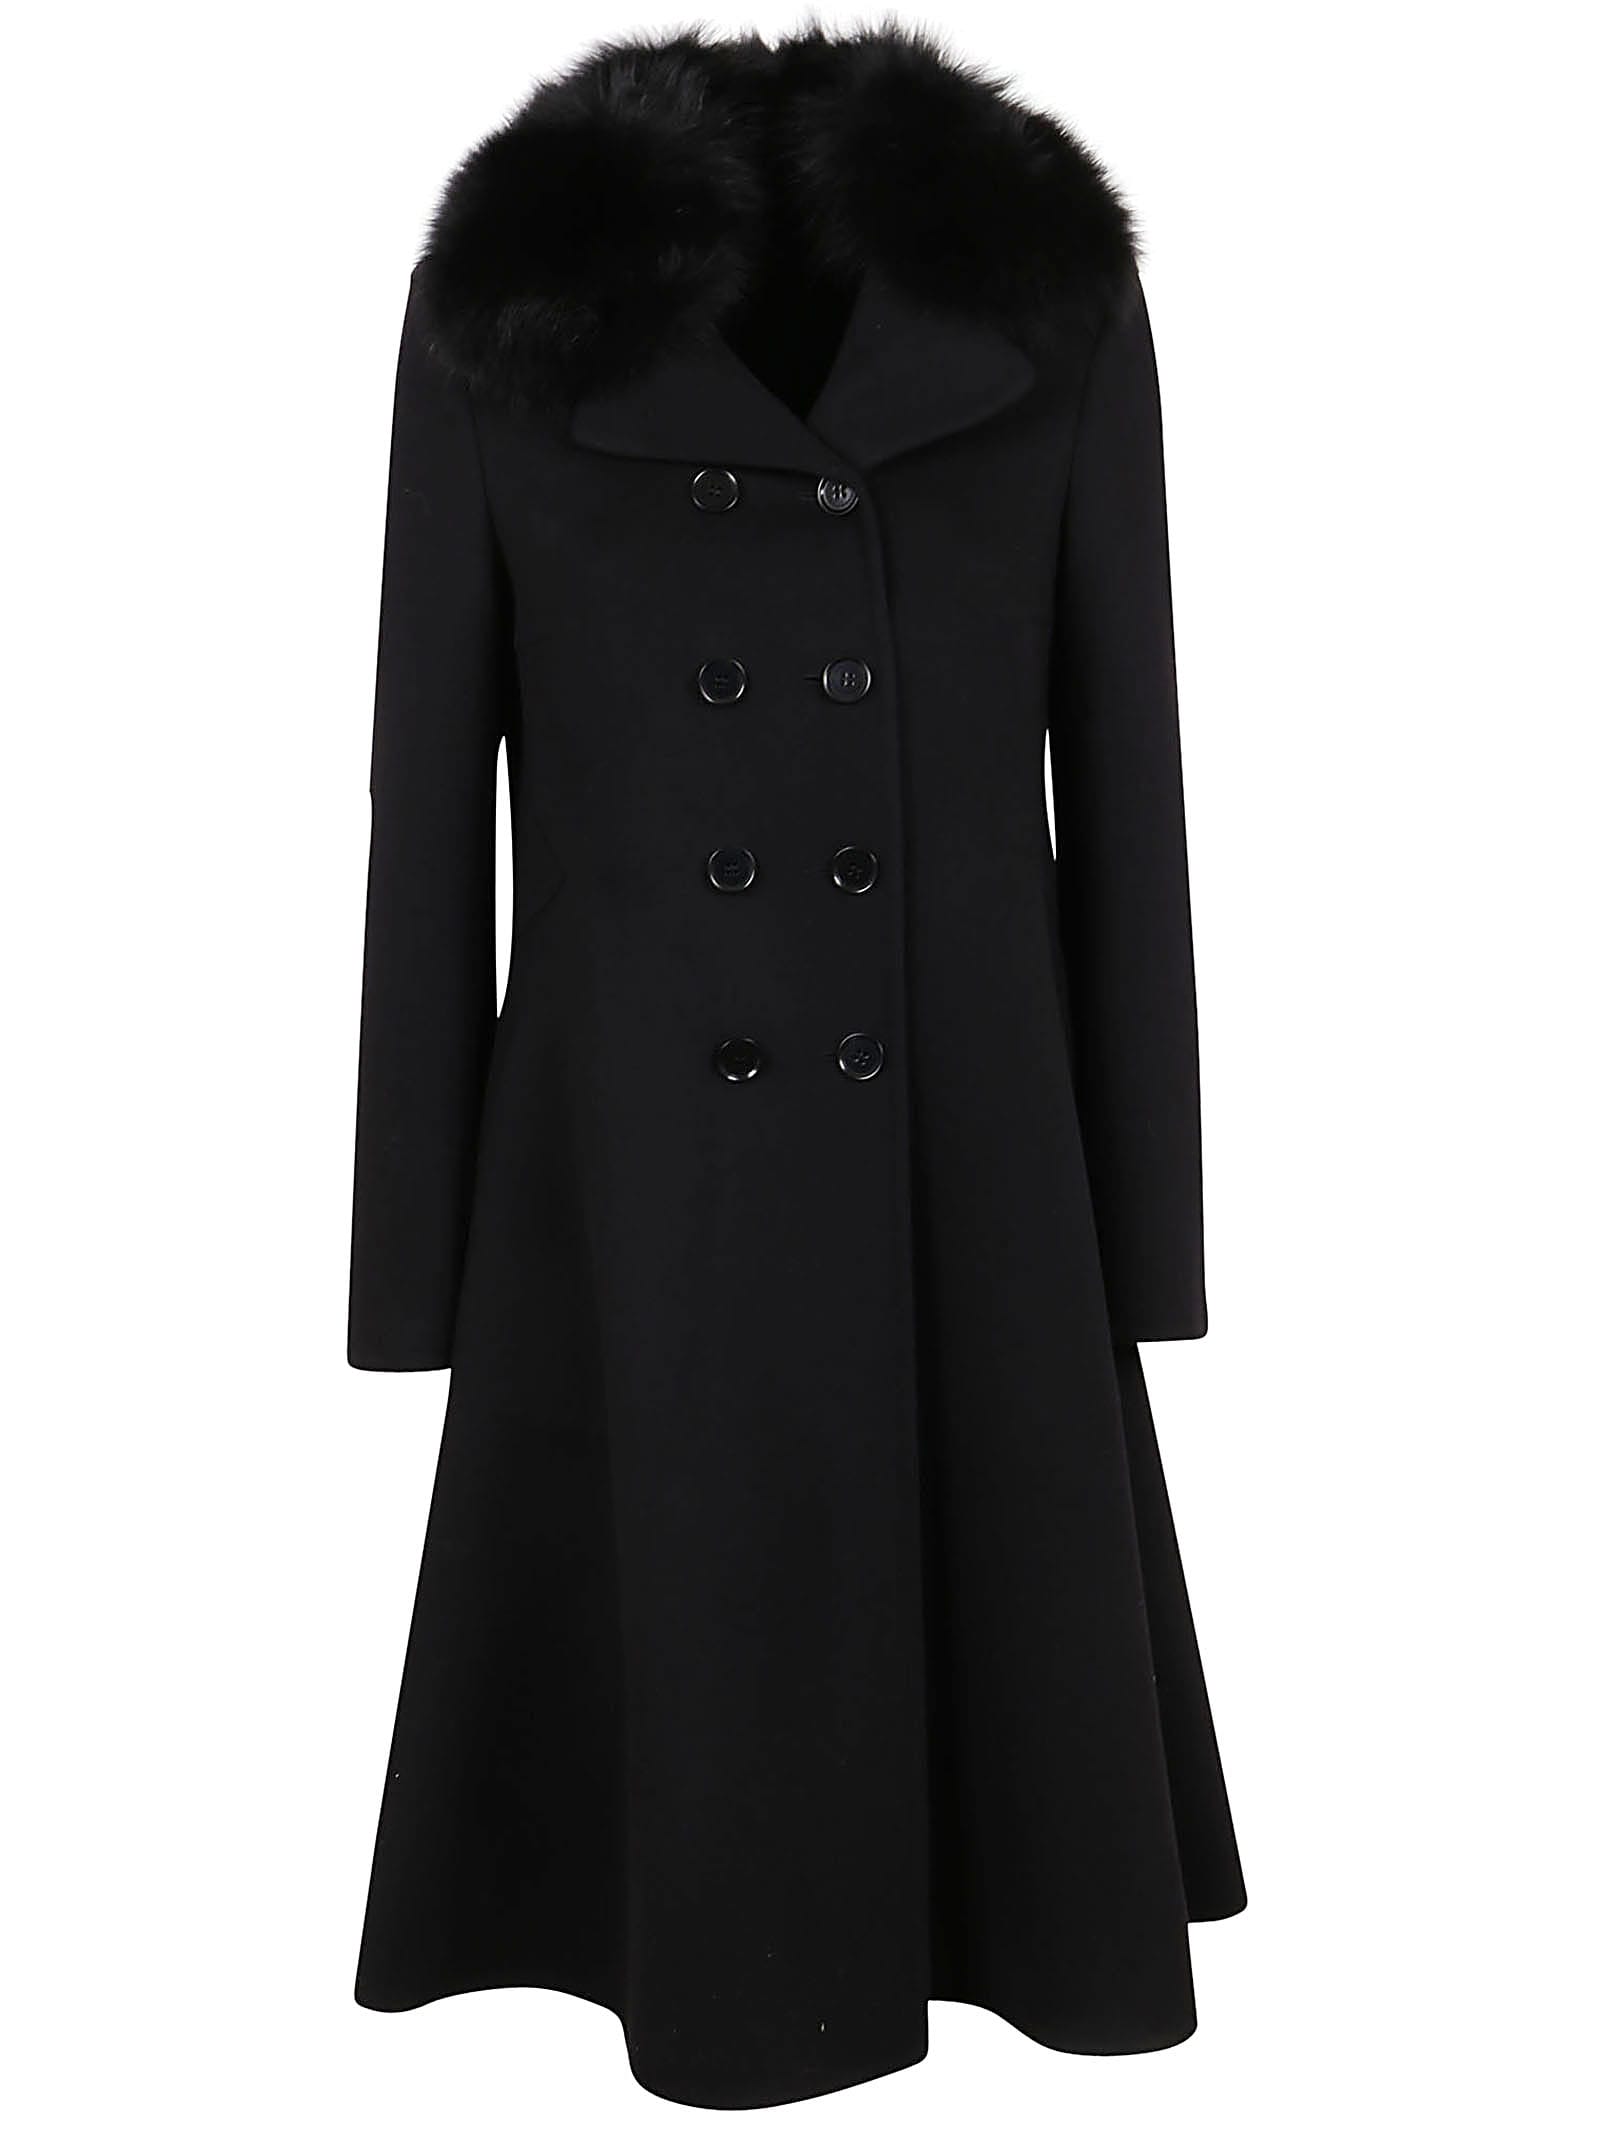 Ermanno Scervino Double-breasted Coat